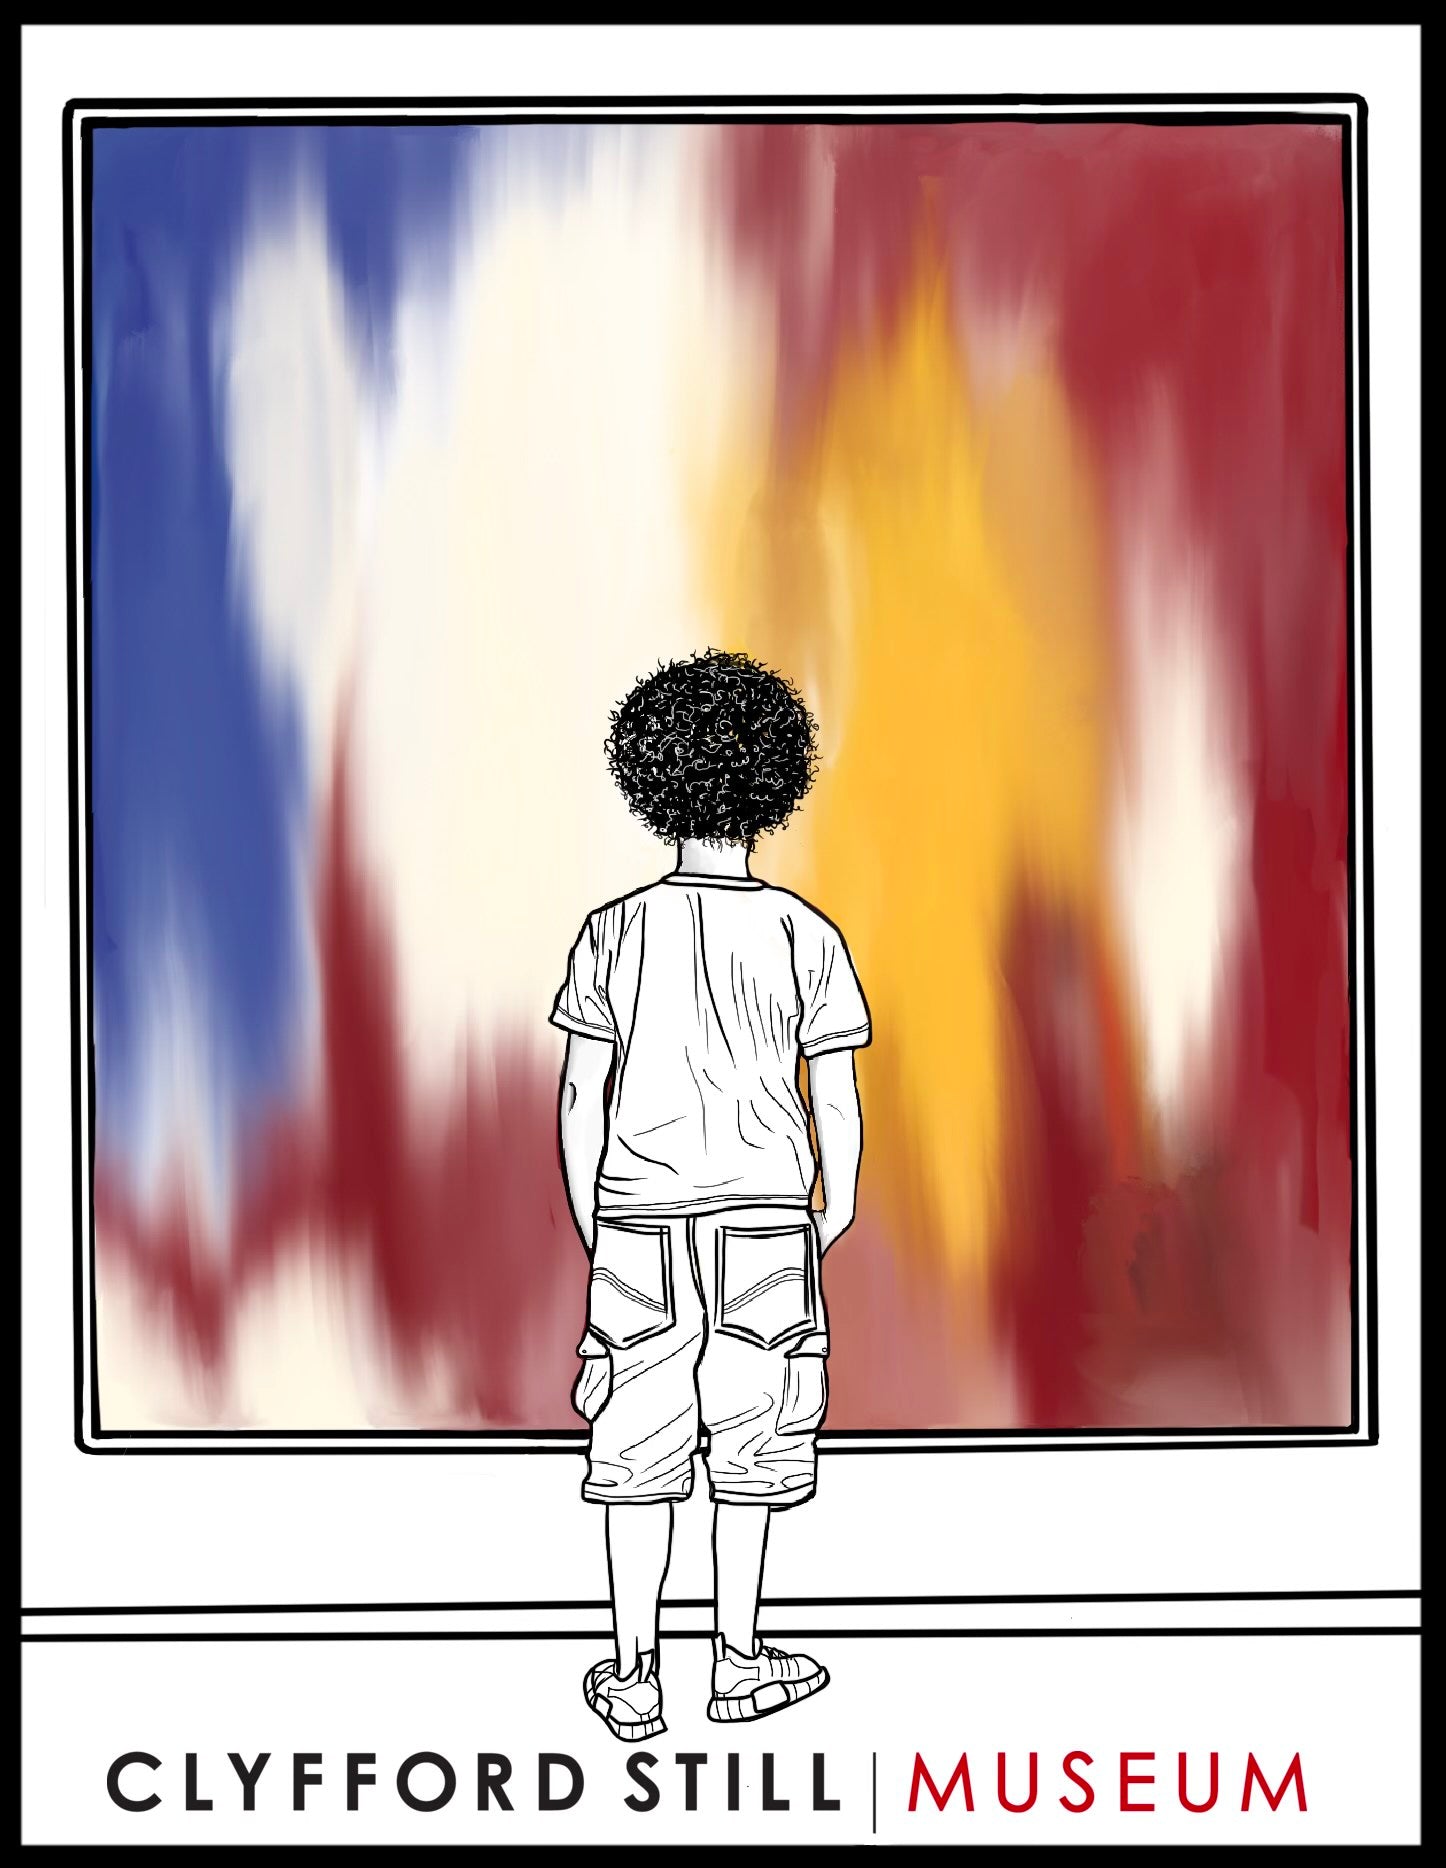 Hand-drawn Sticker of a child standing in front of a colorful Clyfford Still painting